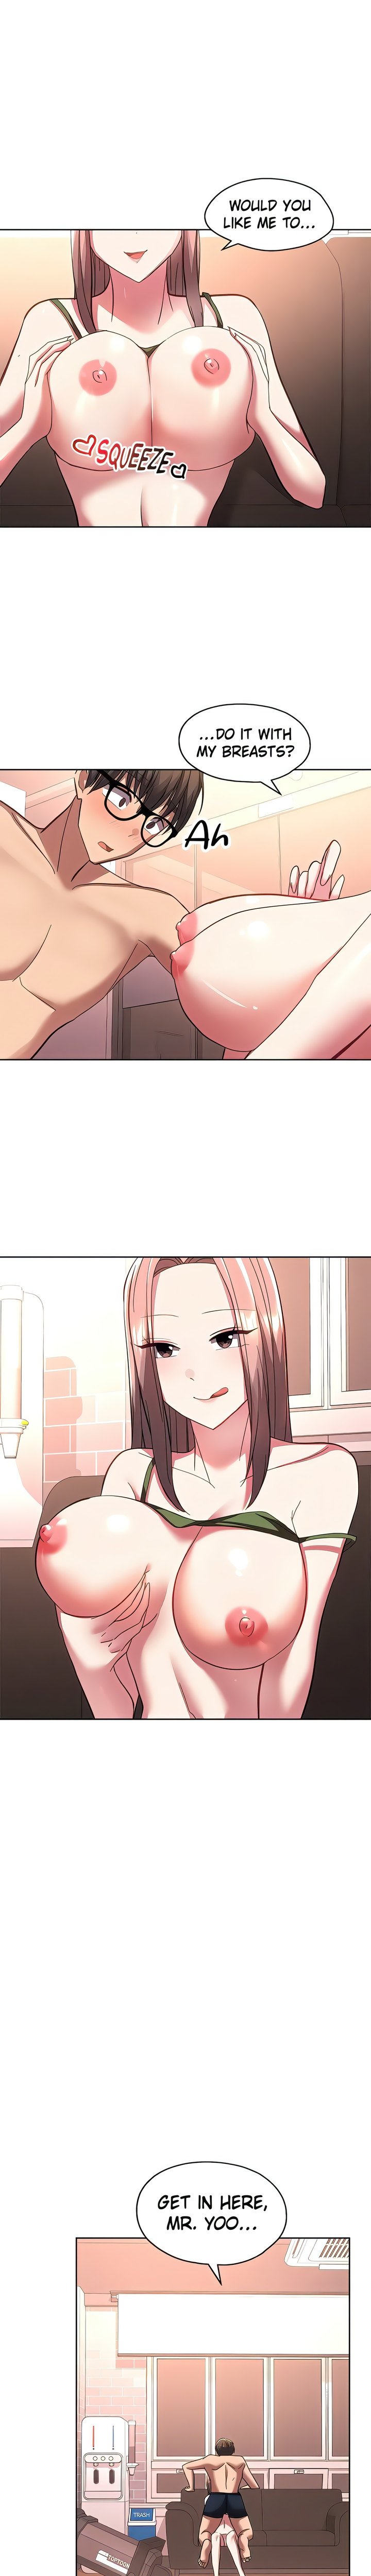 girls-i-used-to-teach-chap-36-11